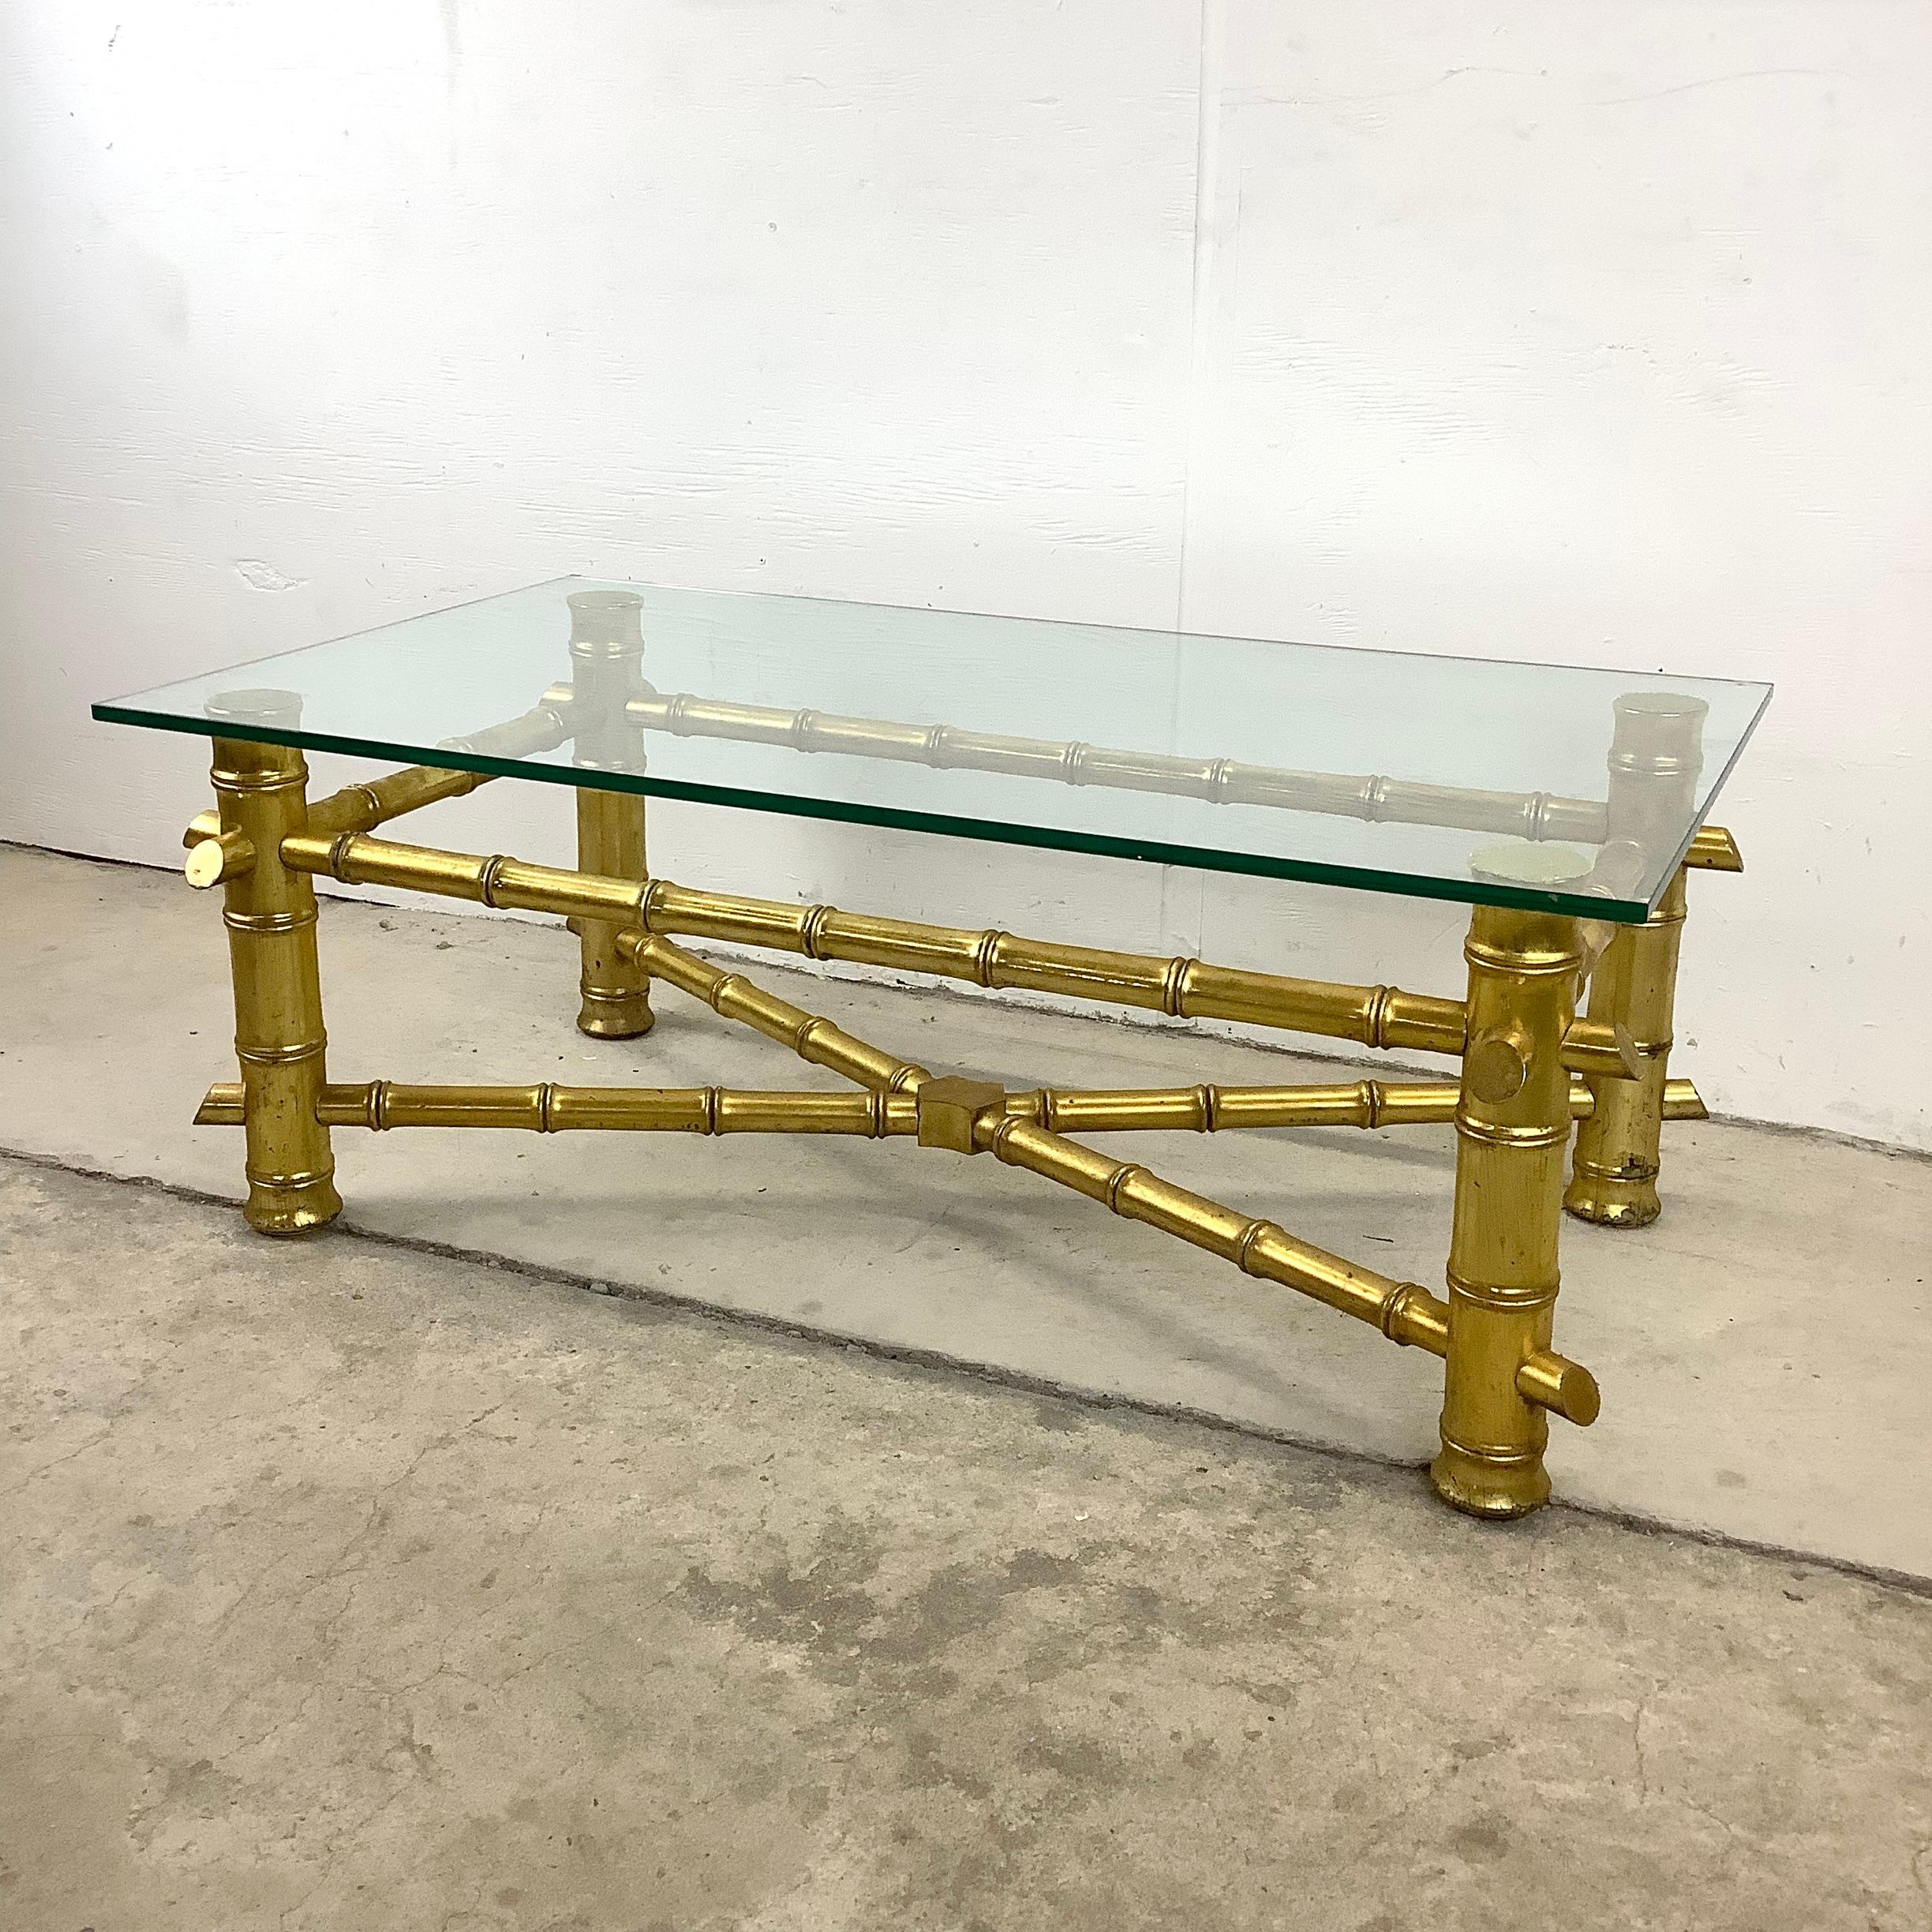 This vintage modern faux bamboo coffee table features a sturdy metal frame with thick glass top, while the unique decorative finish adds boho chic centerpiece to any seating arrangement. Petite size makes this a great choice in adding maximum style